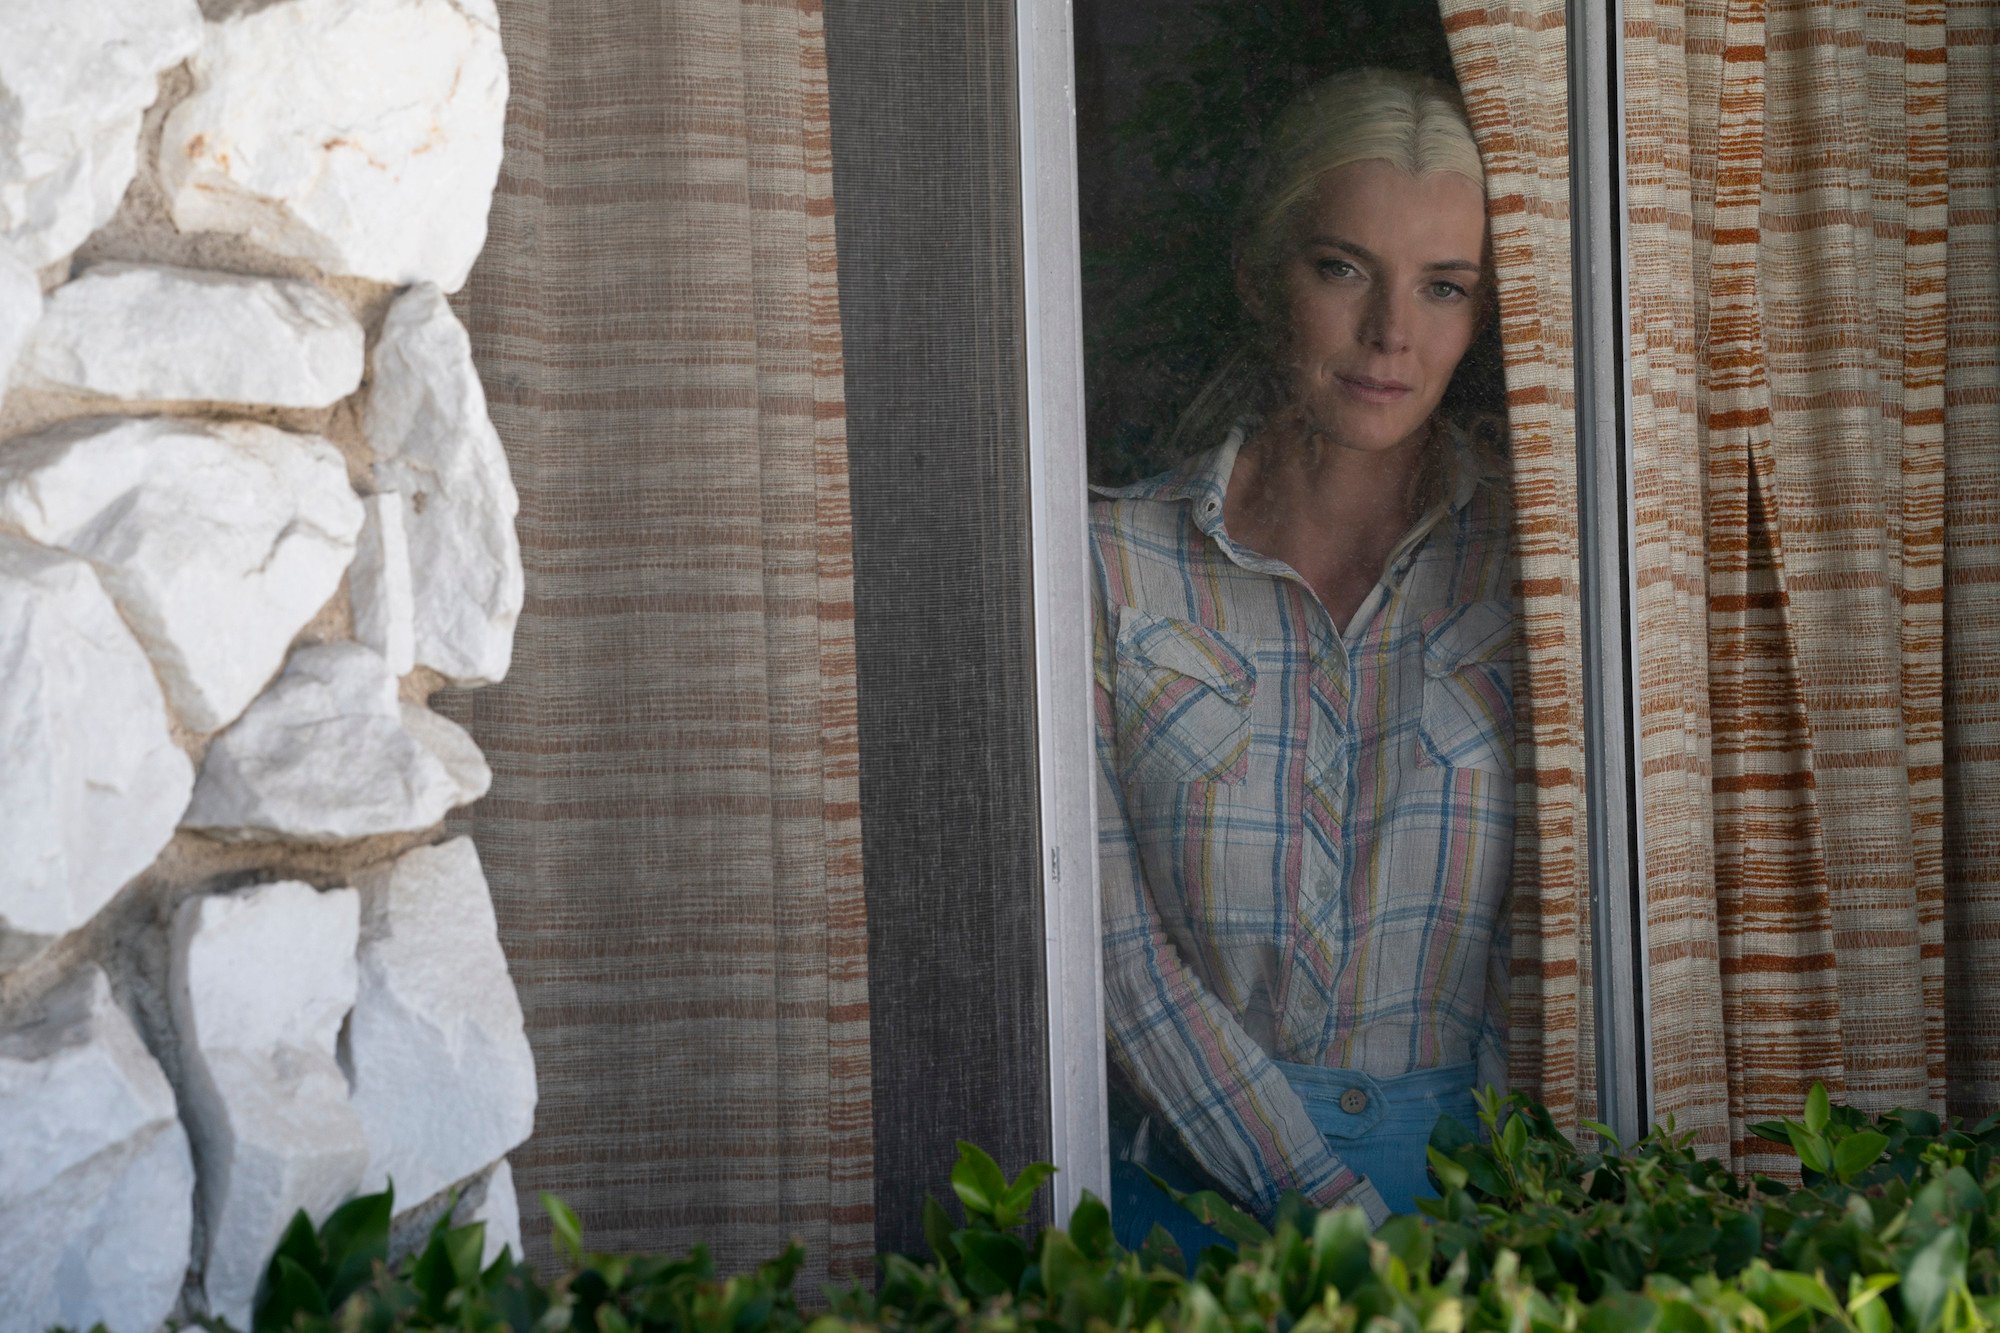 'Gaslit' Episode 4 'Malum in Se' production still featuring Betty Gilpin as Mo Dean wearing a plaid button down shirt while looking out a window.